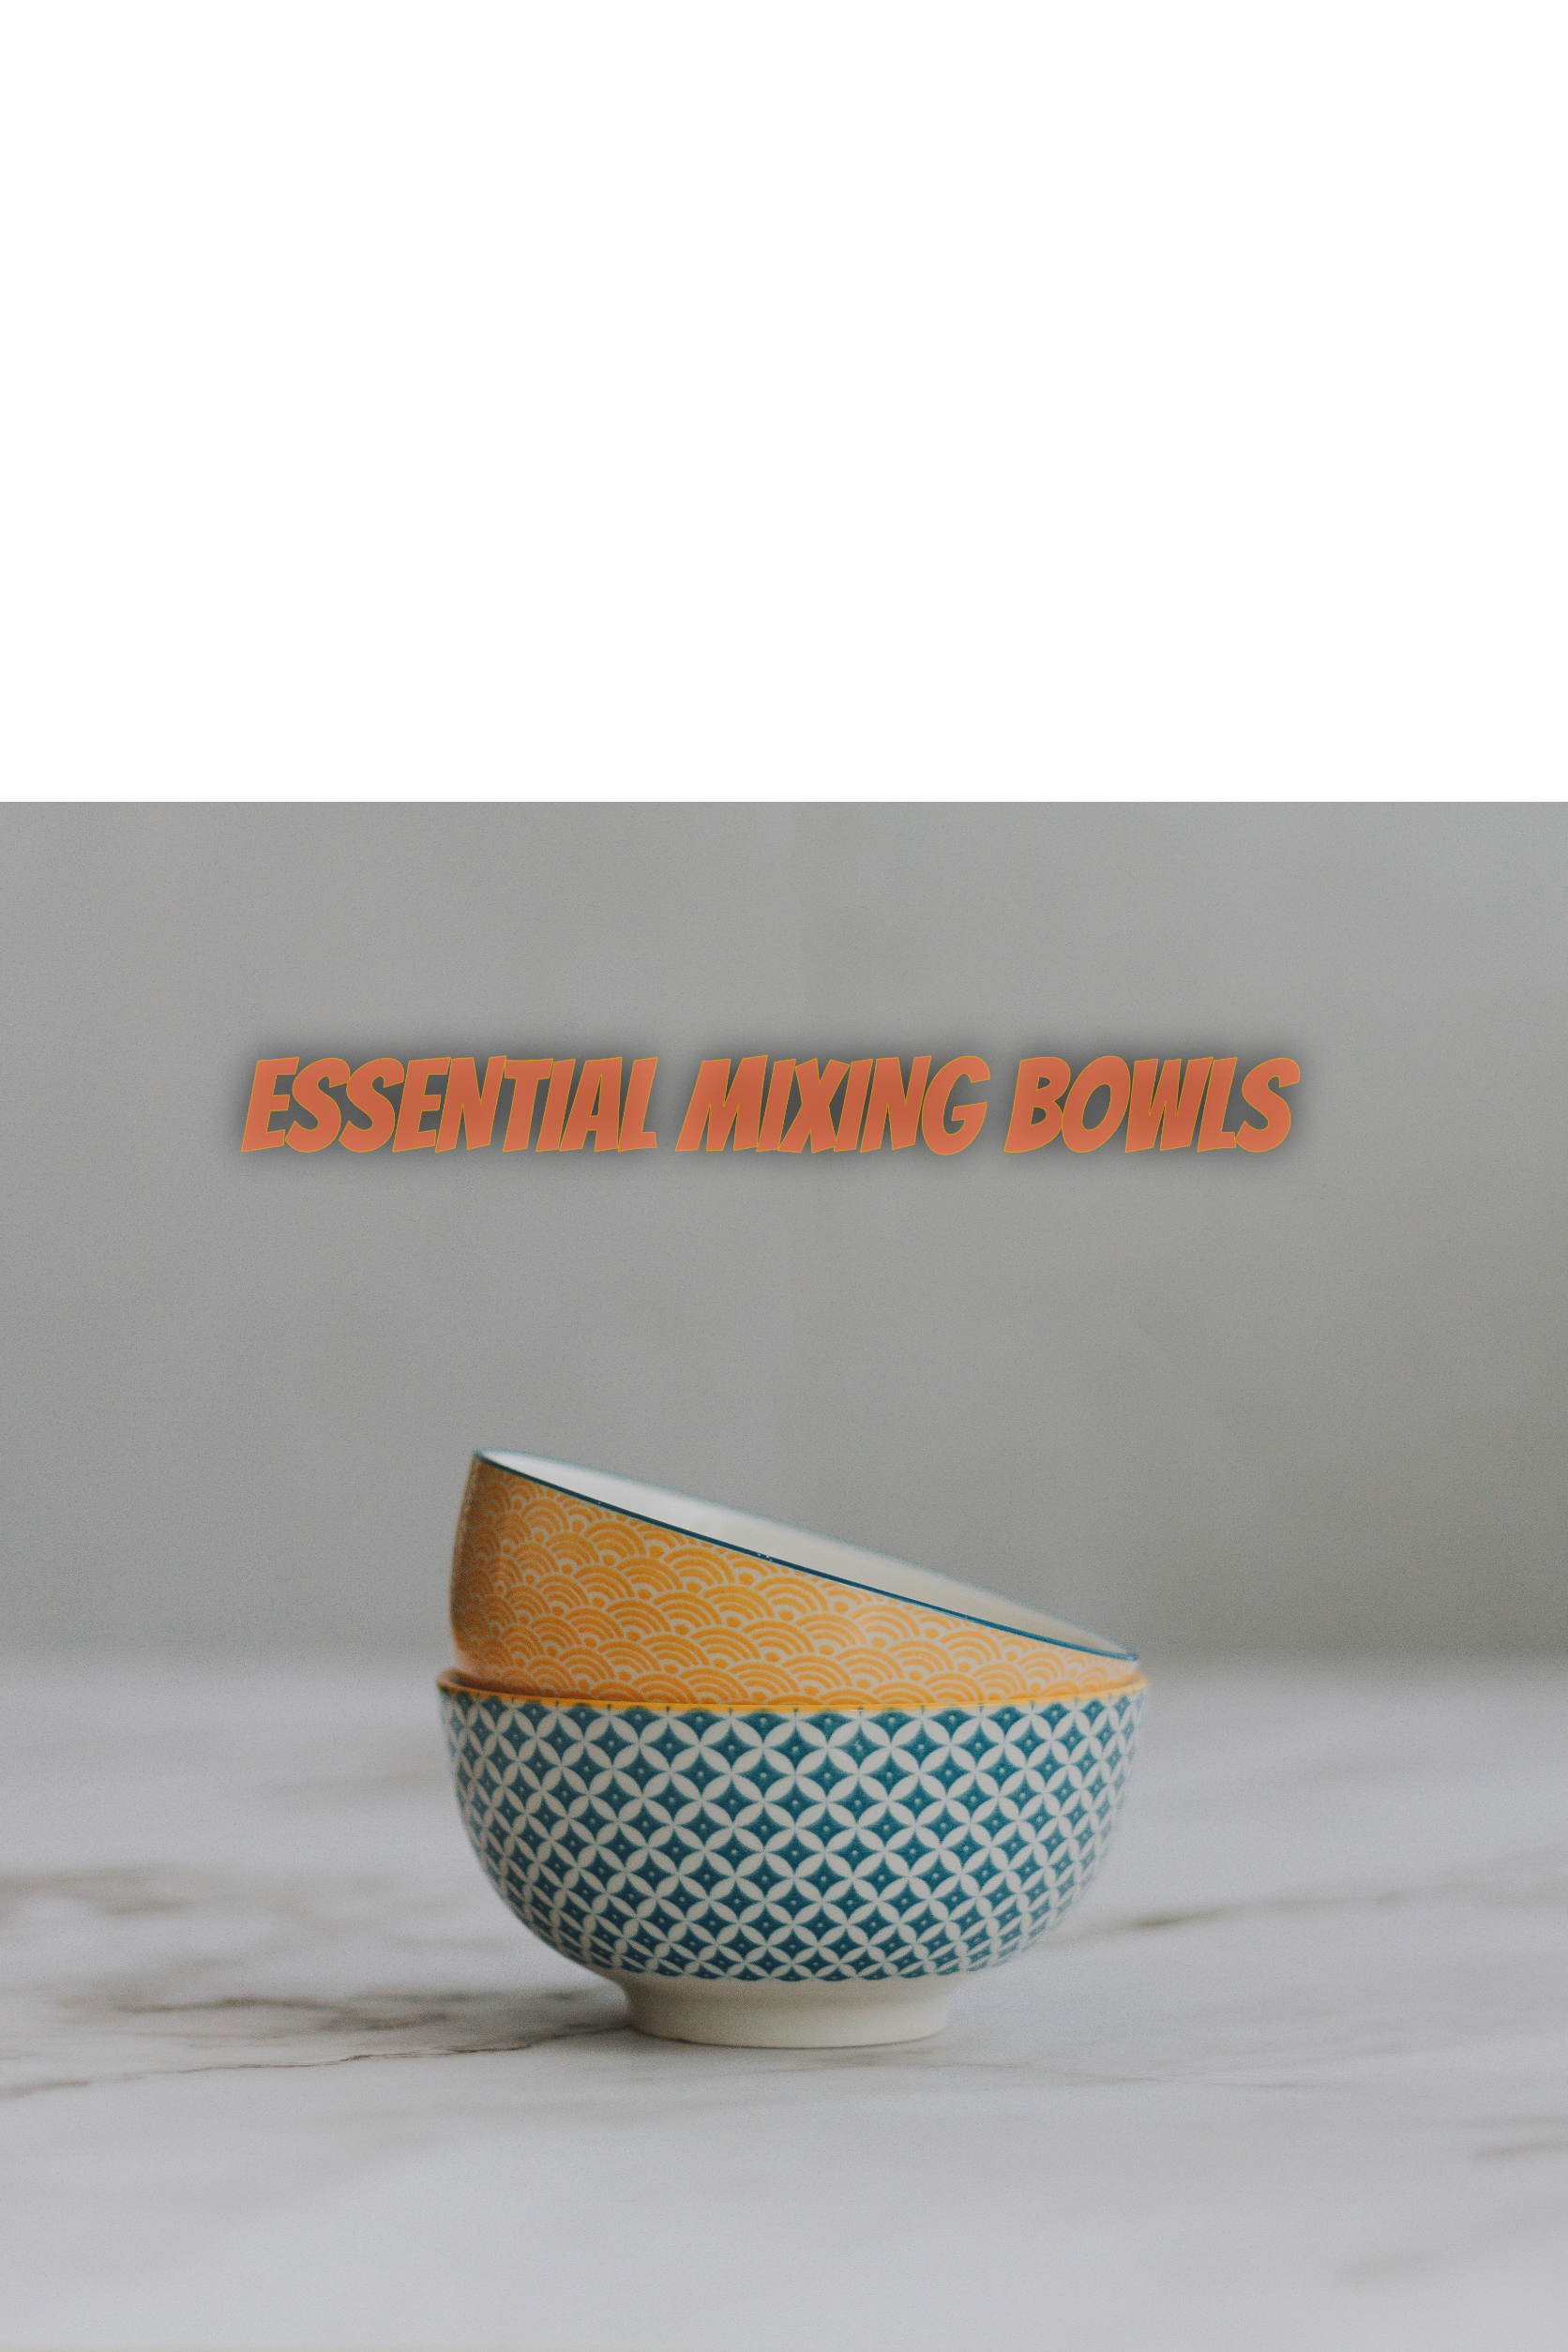 Best Essential Mixing Bowls